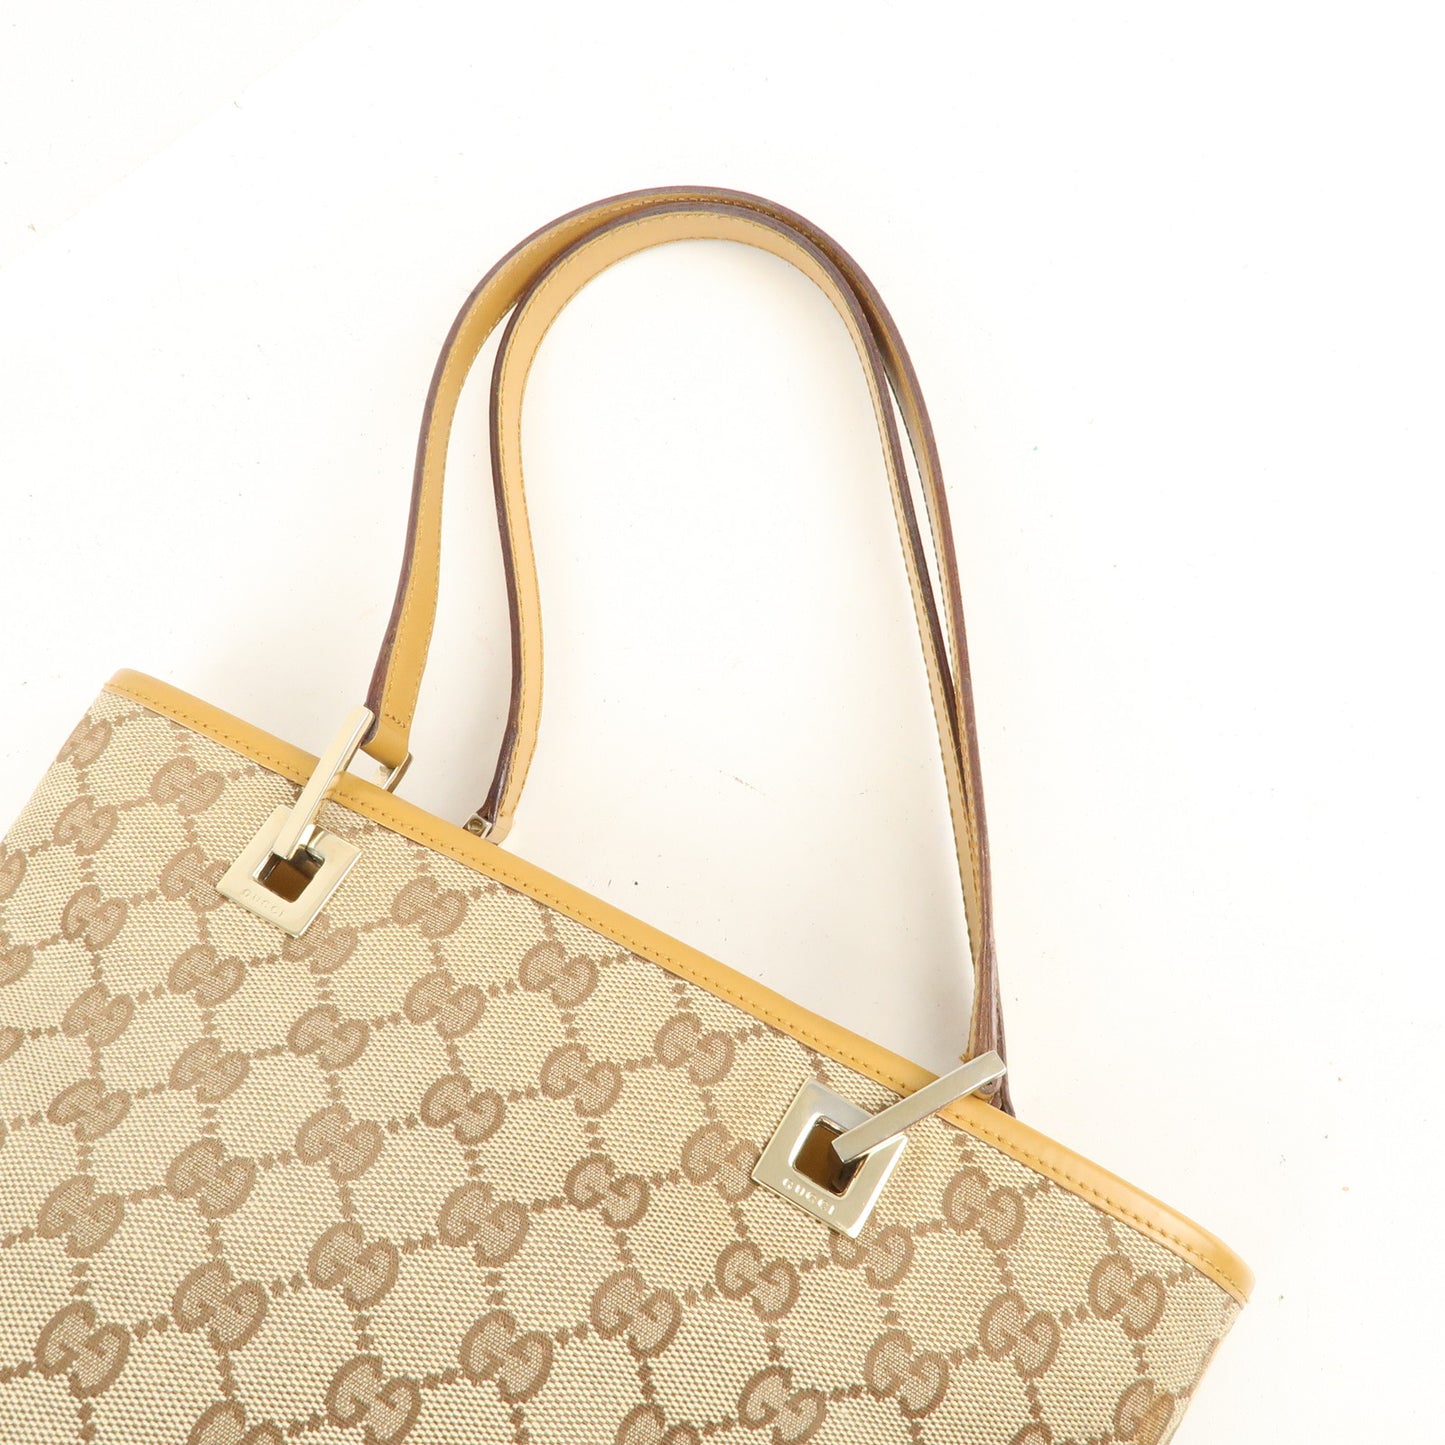 GUCCI GG Canvas Leather Tote Bag Beige Light Brown 002.1099